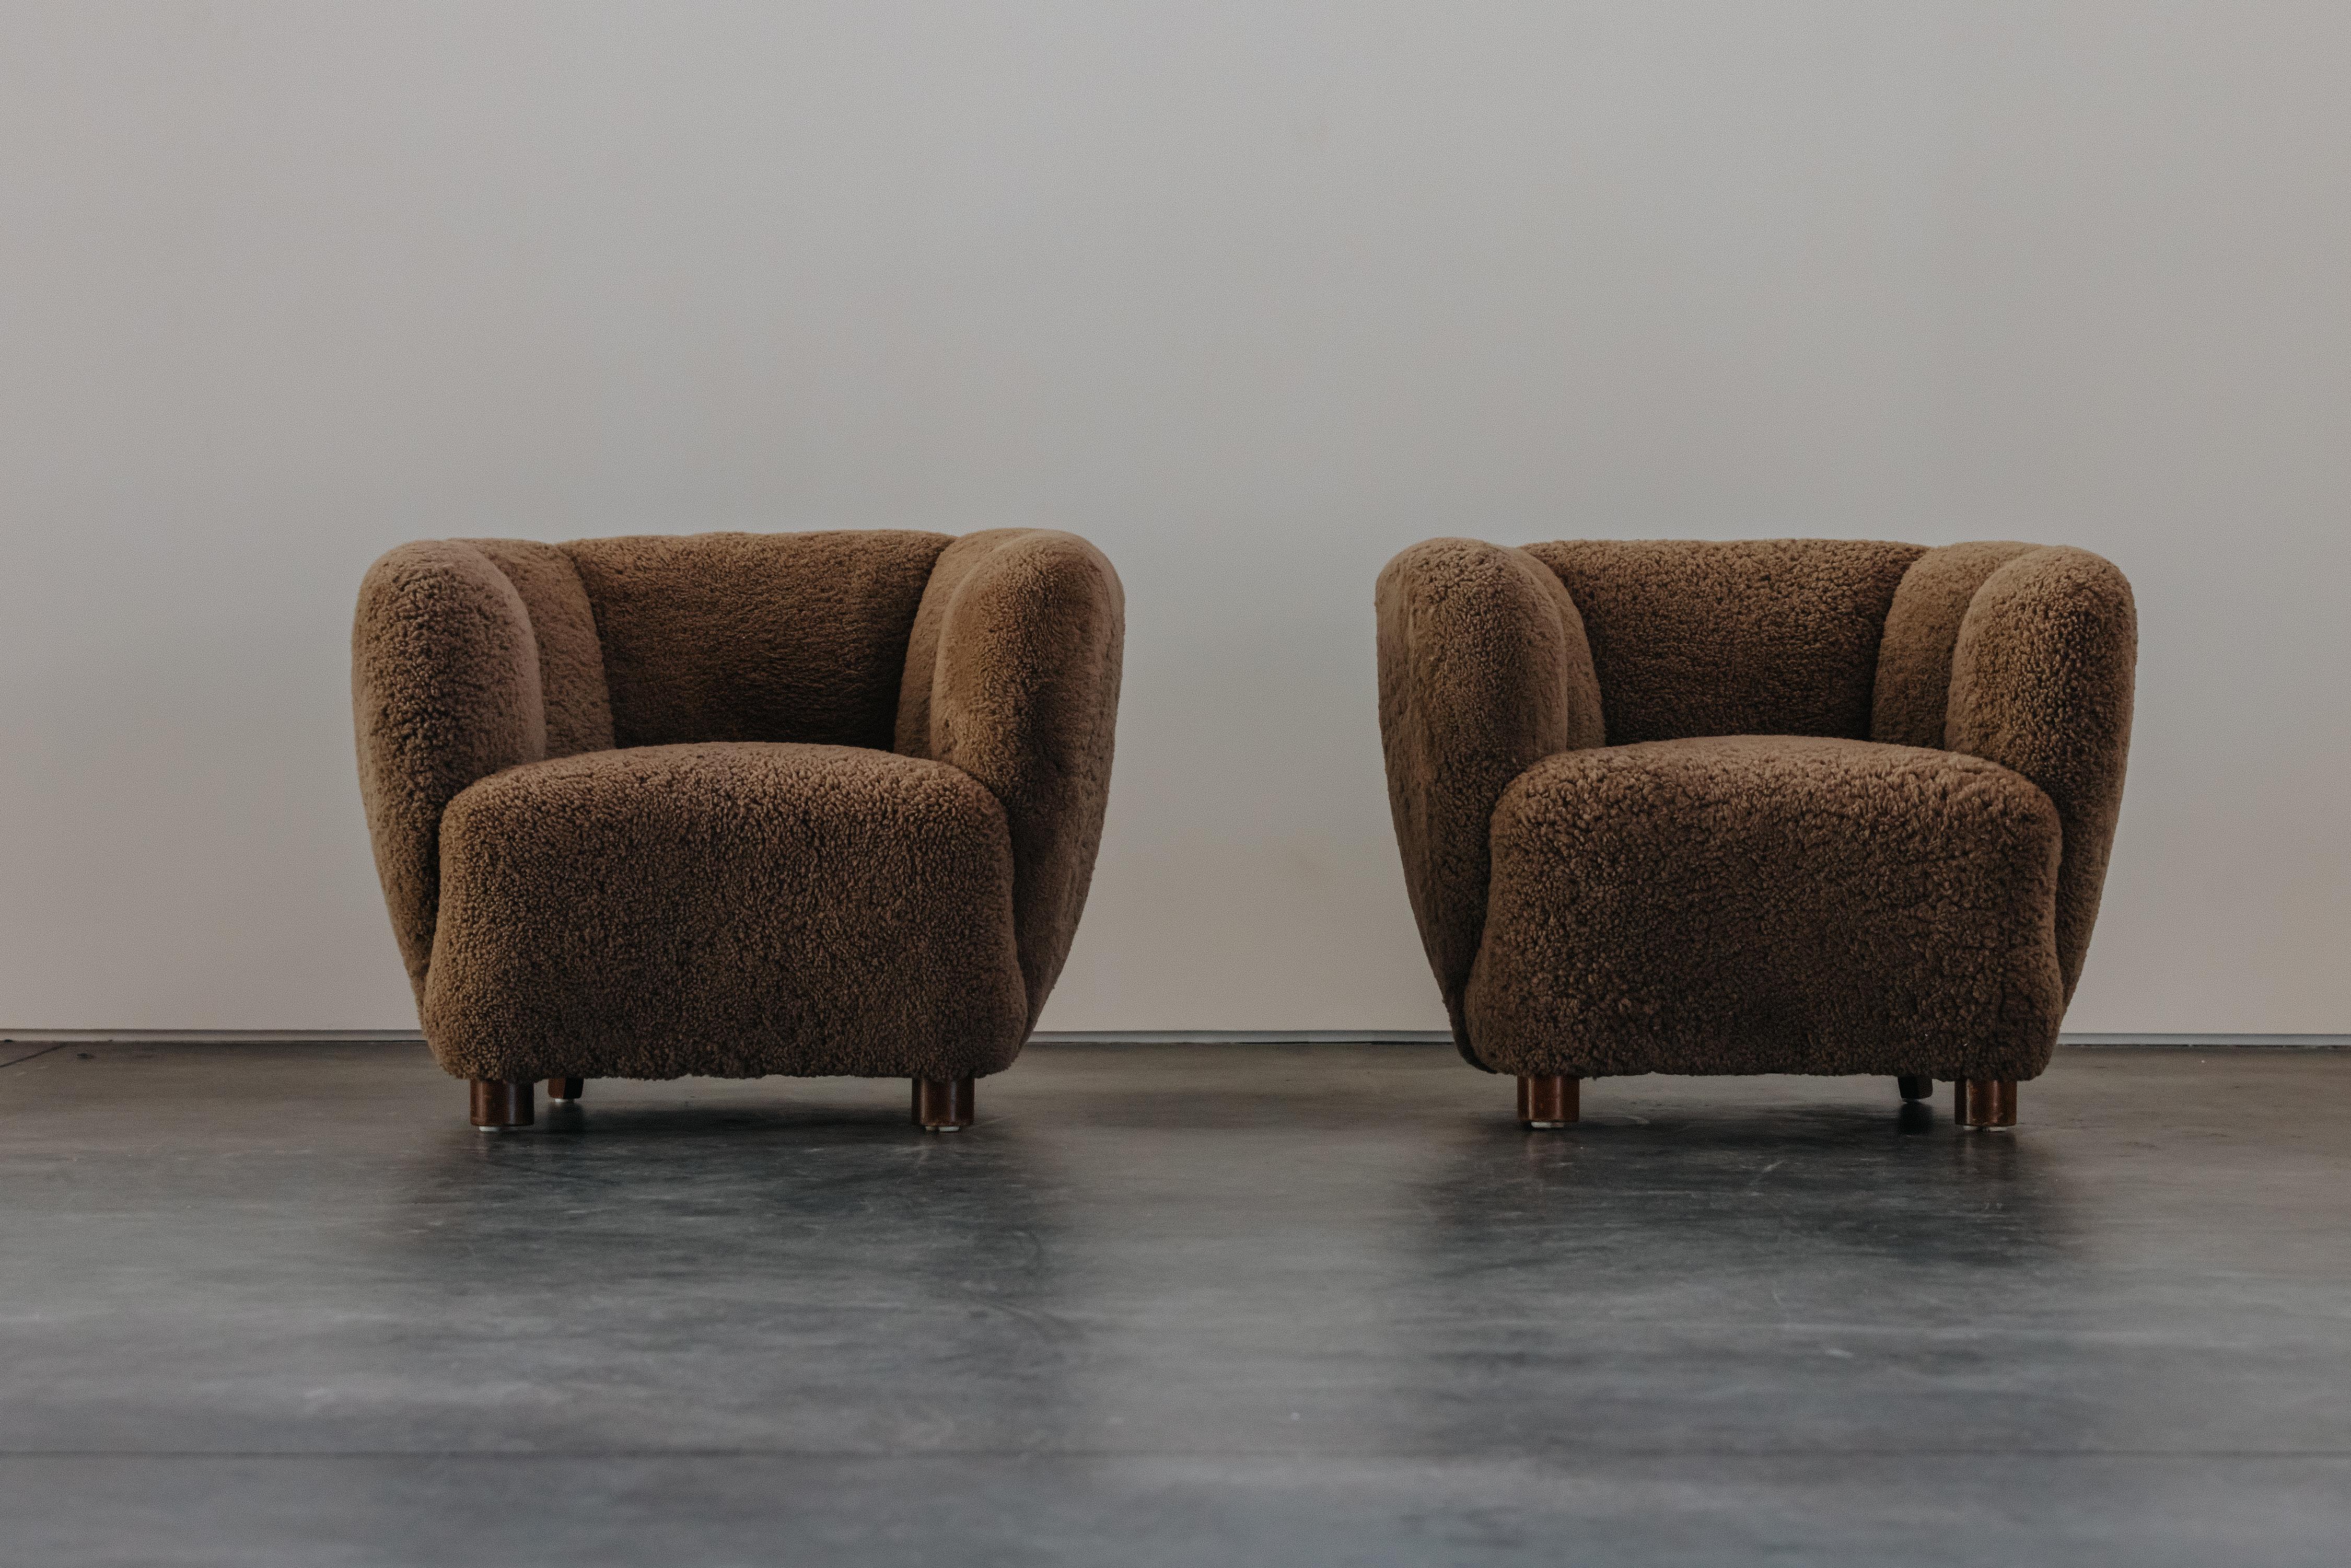 Vintage Pair Of Shearling Lounge Chairs From Denmark, Circa 1960.  Comfortable pair of lounge chairs later reupholstered in super soft grey brown shearling.
